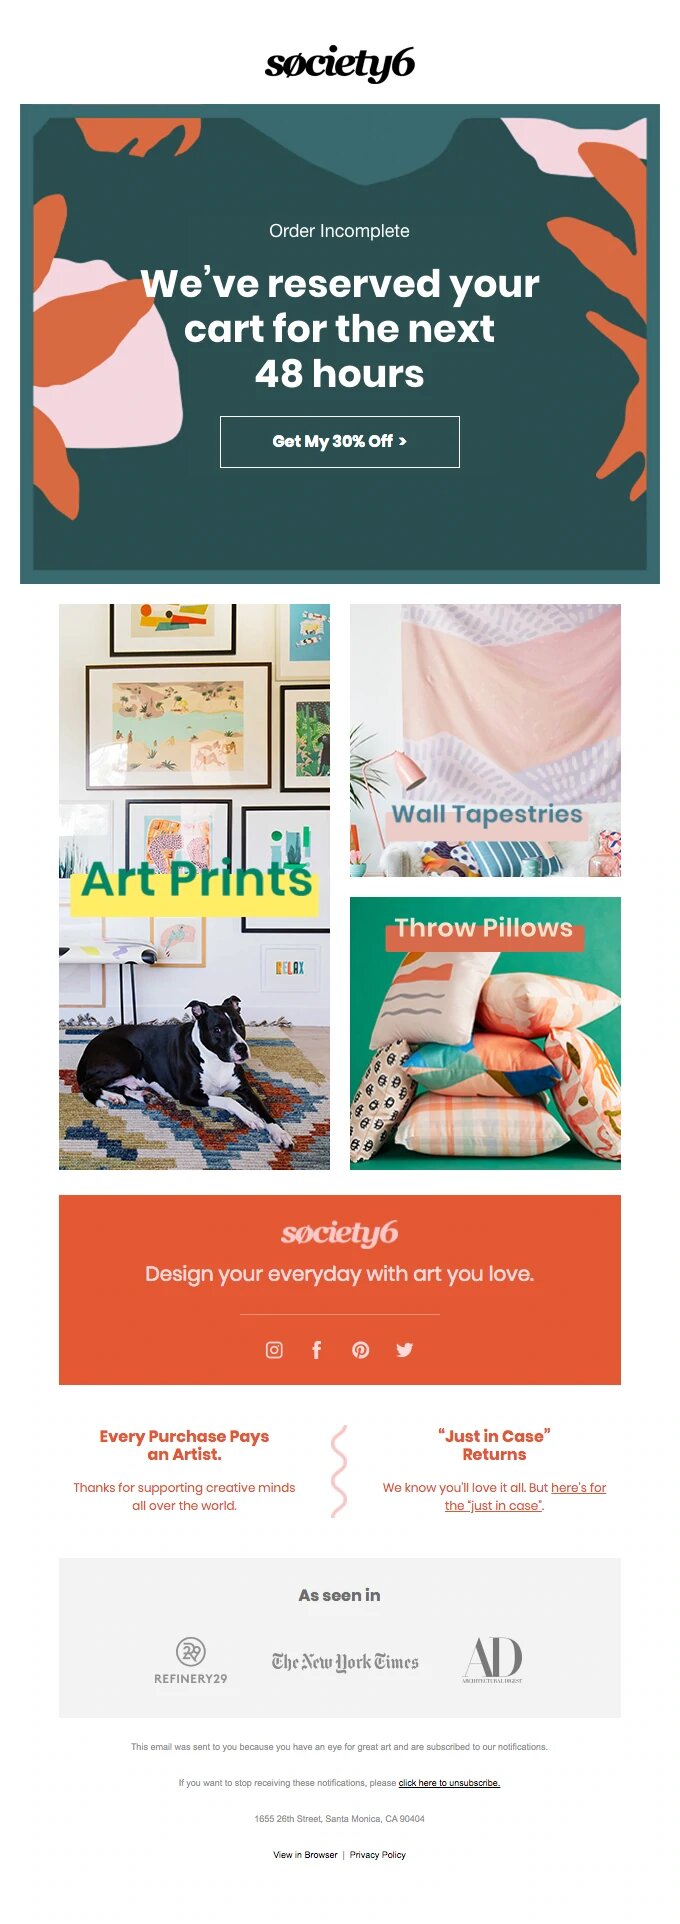 example email from society6